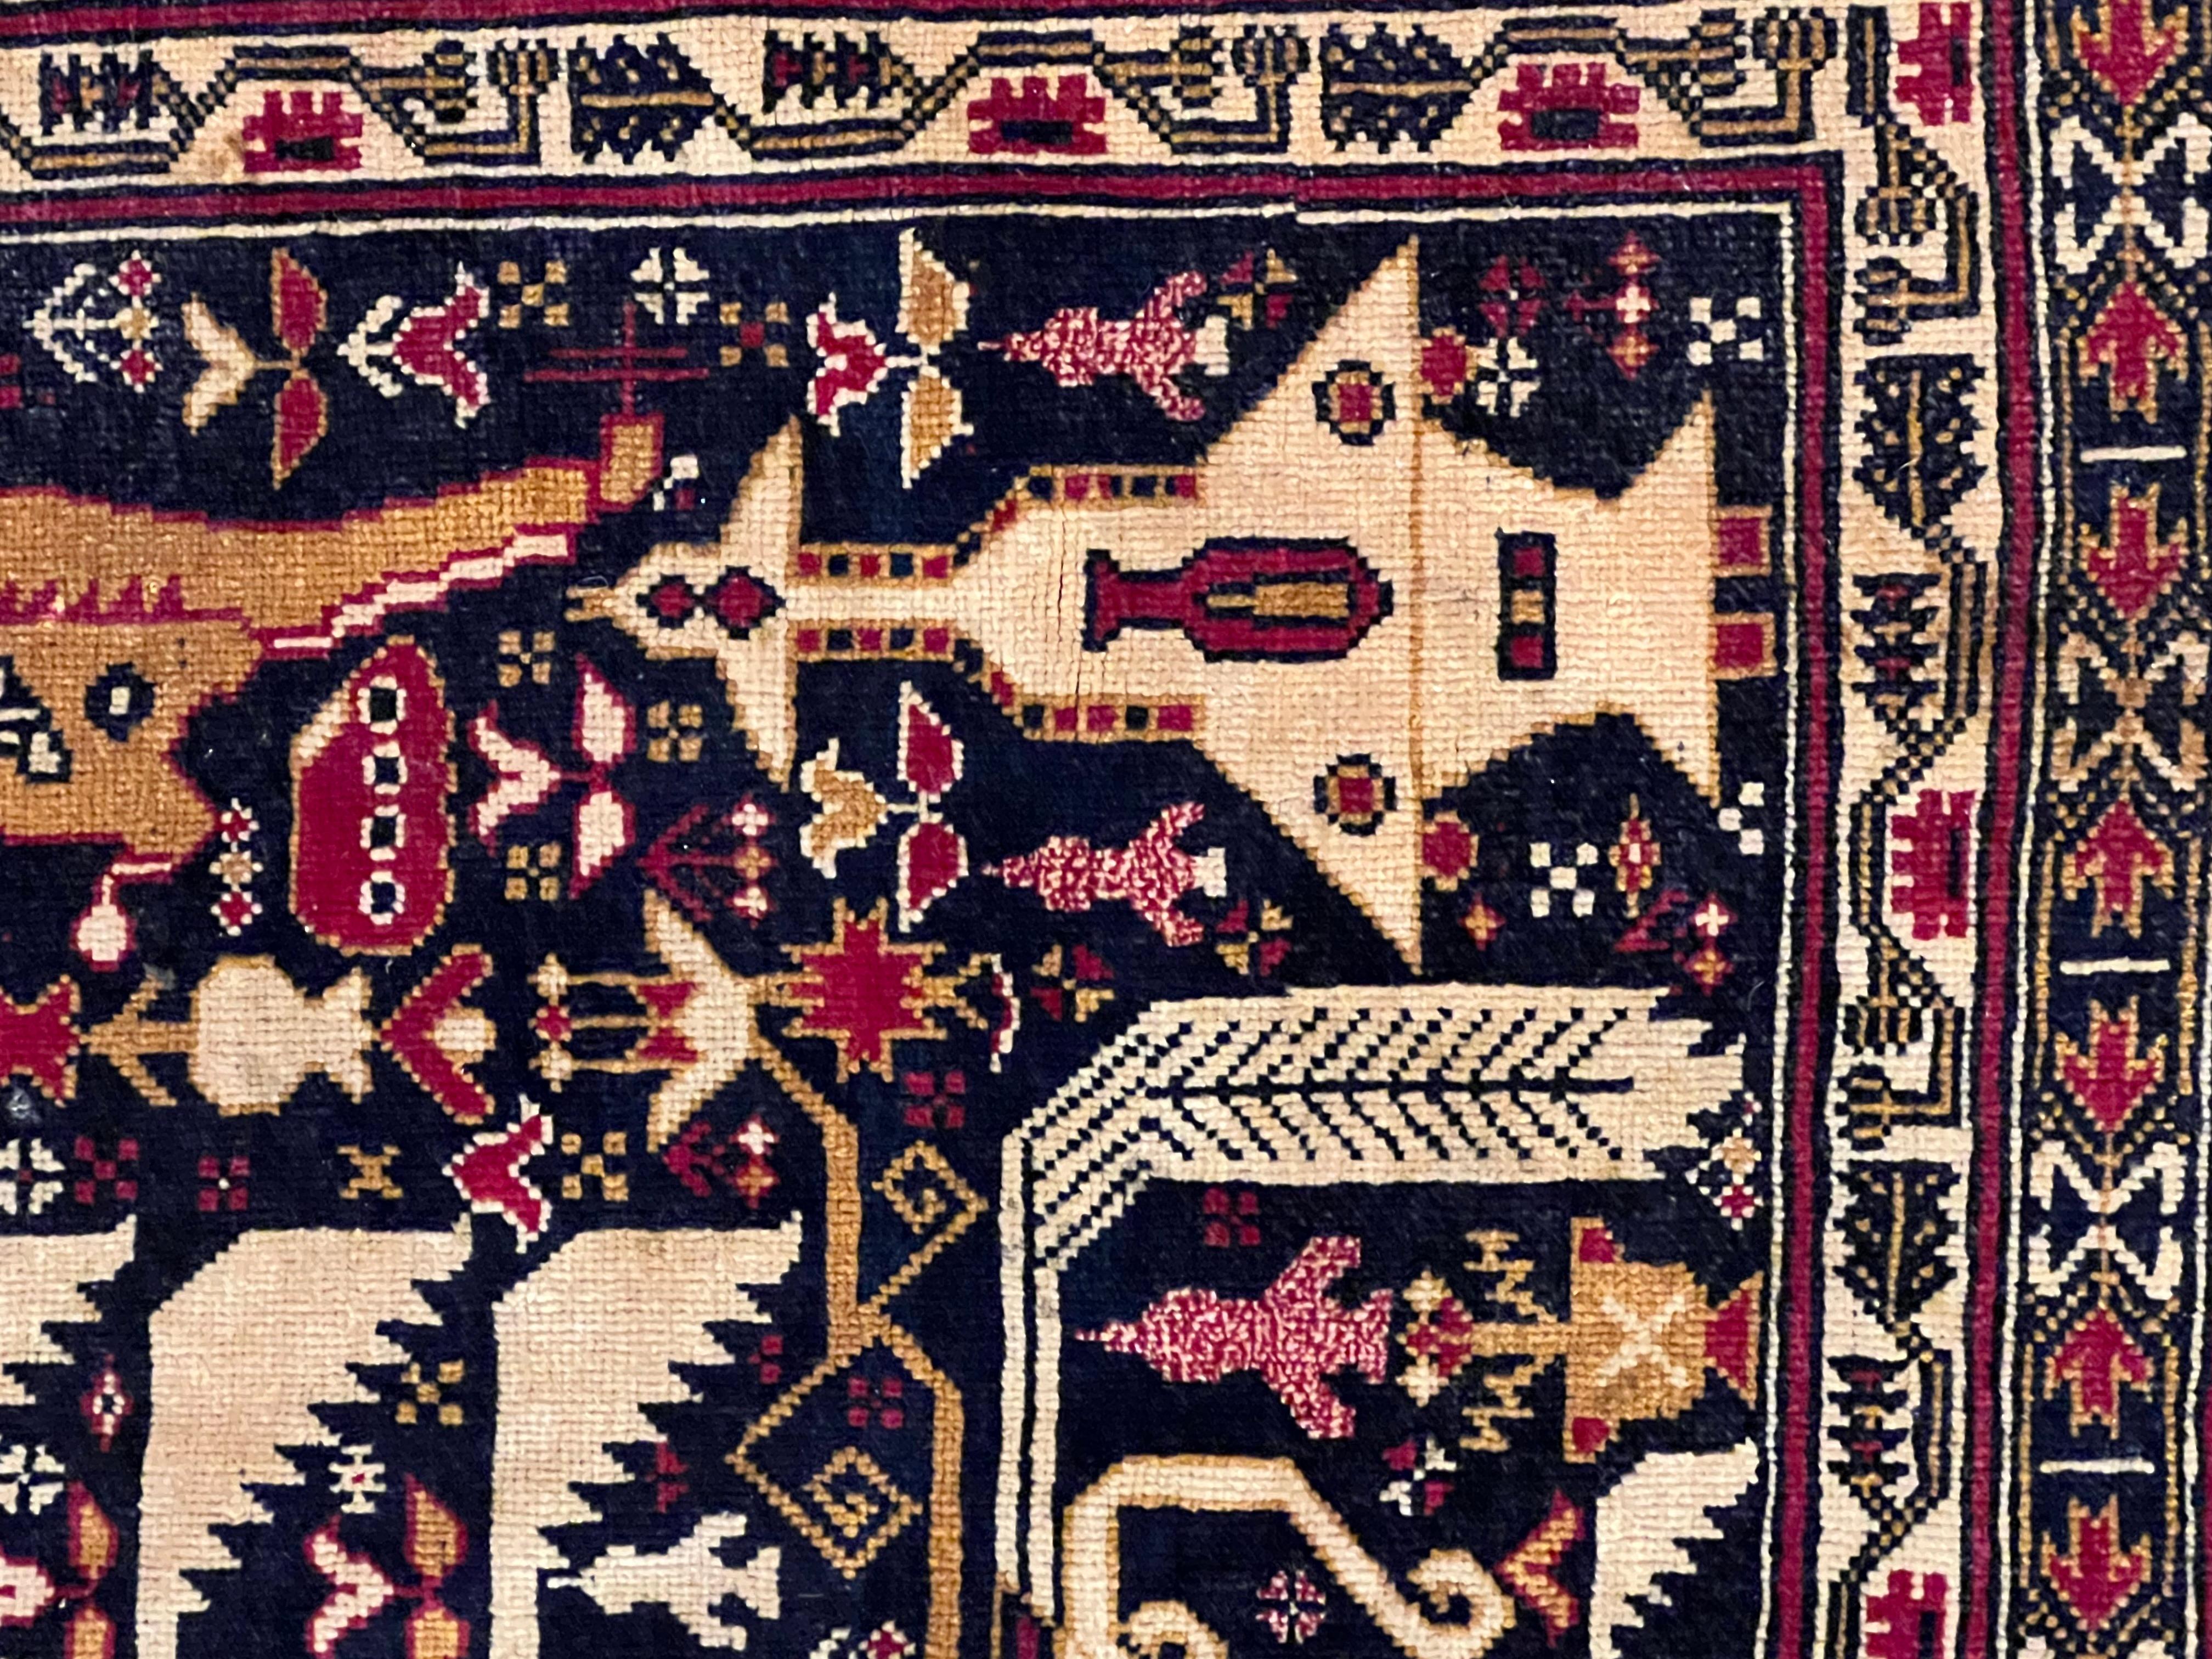 Traditionally carpets made by Afghan tribes included symbols often associated with life rather than death and war. However, since the Soviet invasion of 1979, some weavers have incorporated provocative images that were inspired by what the war